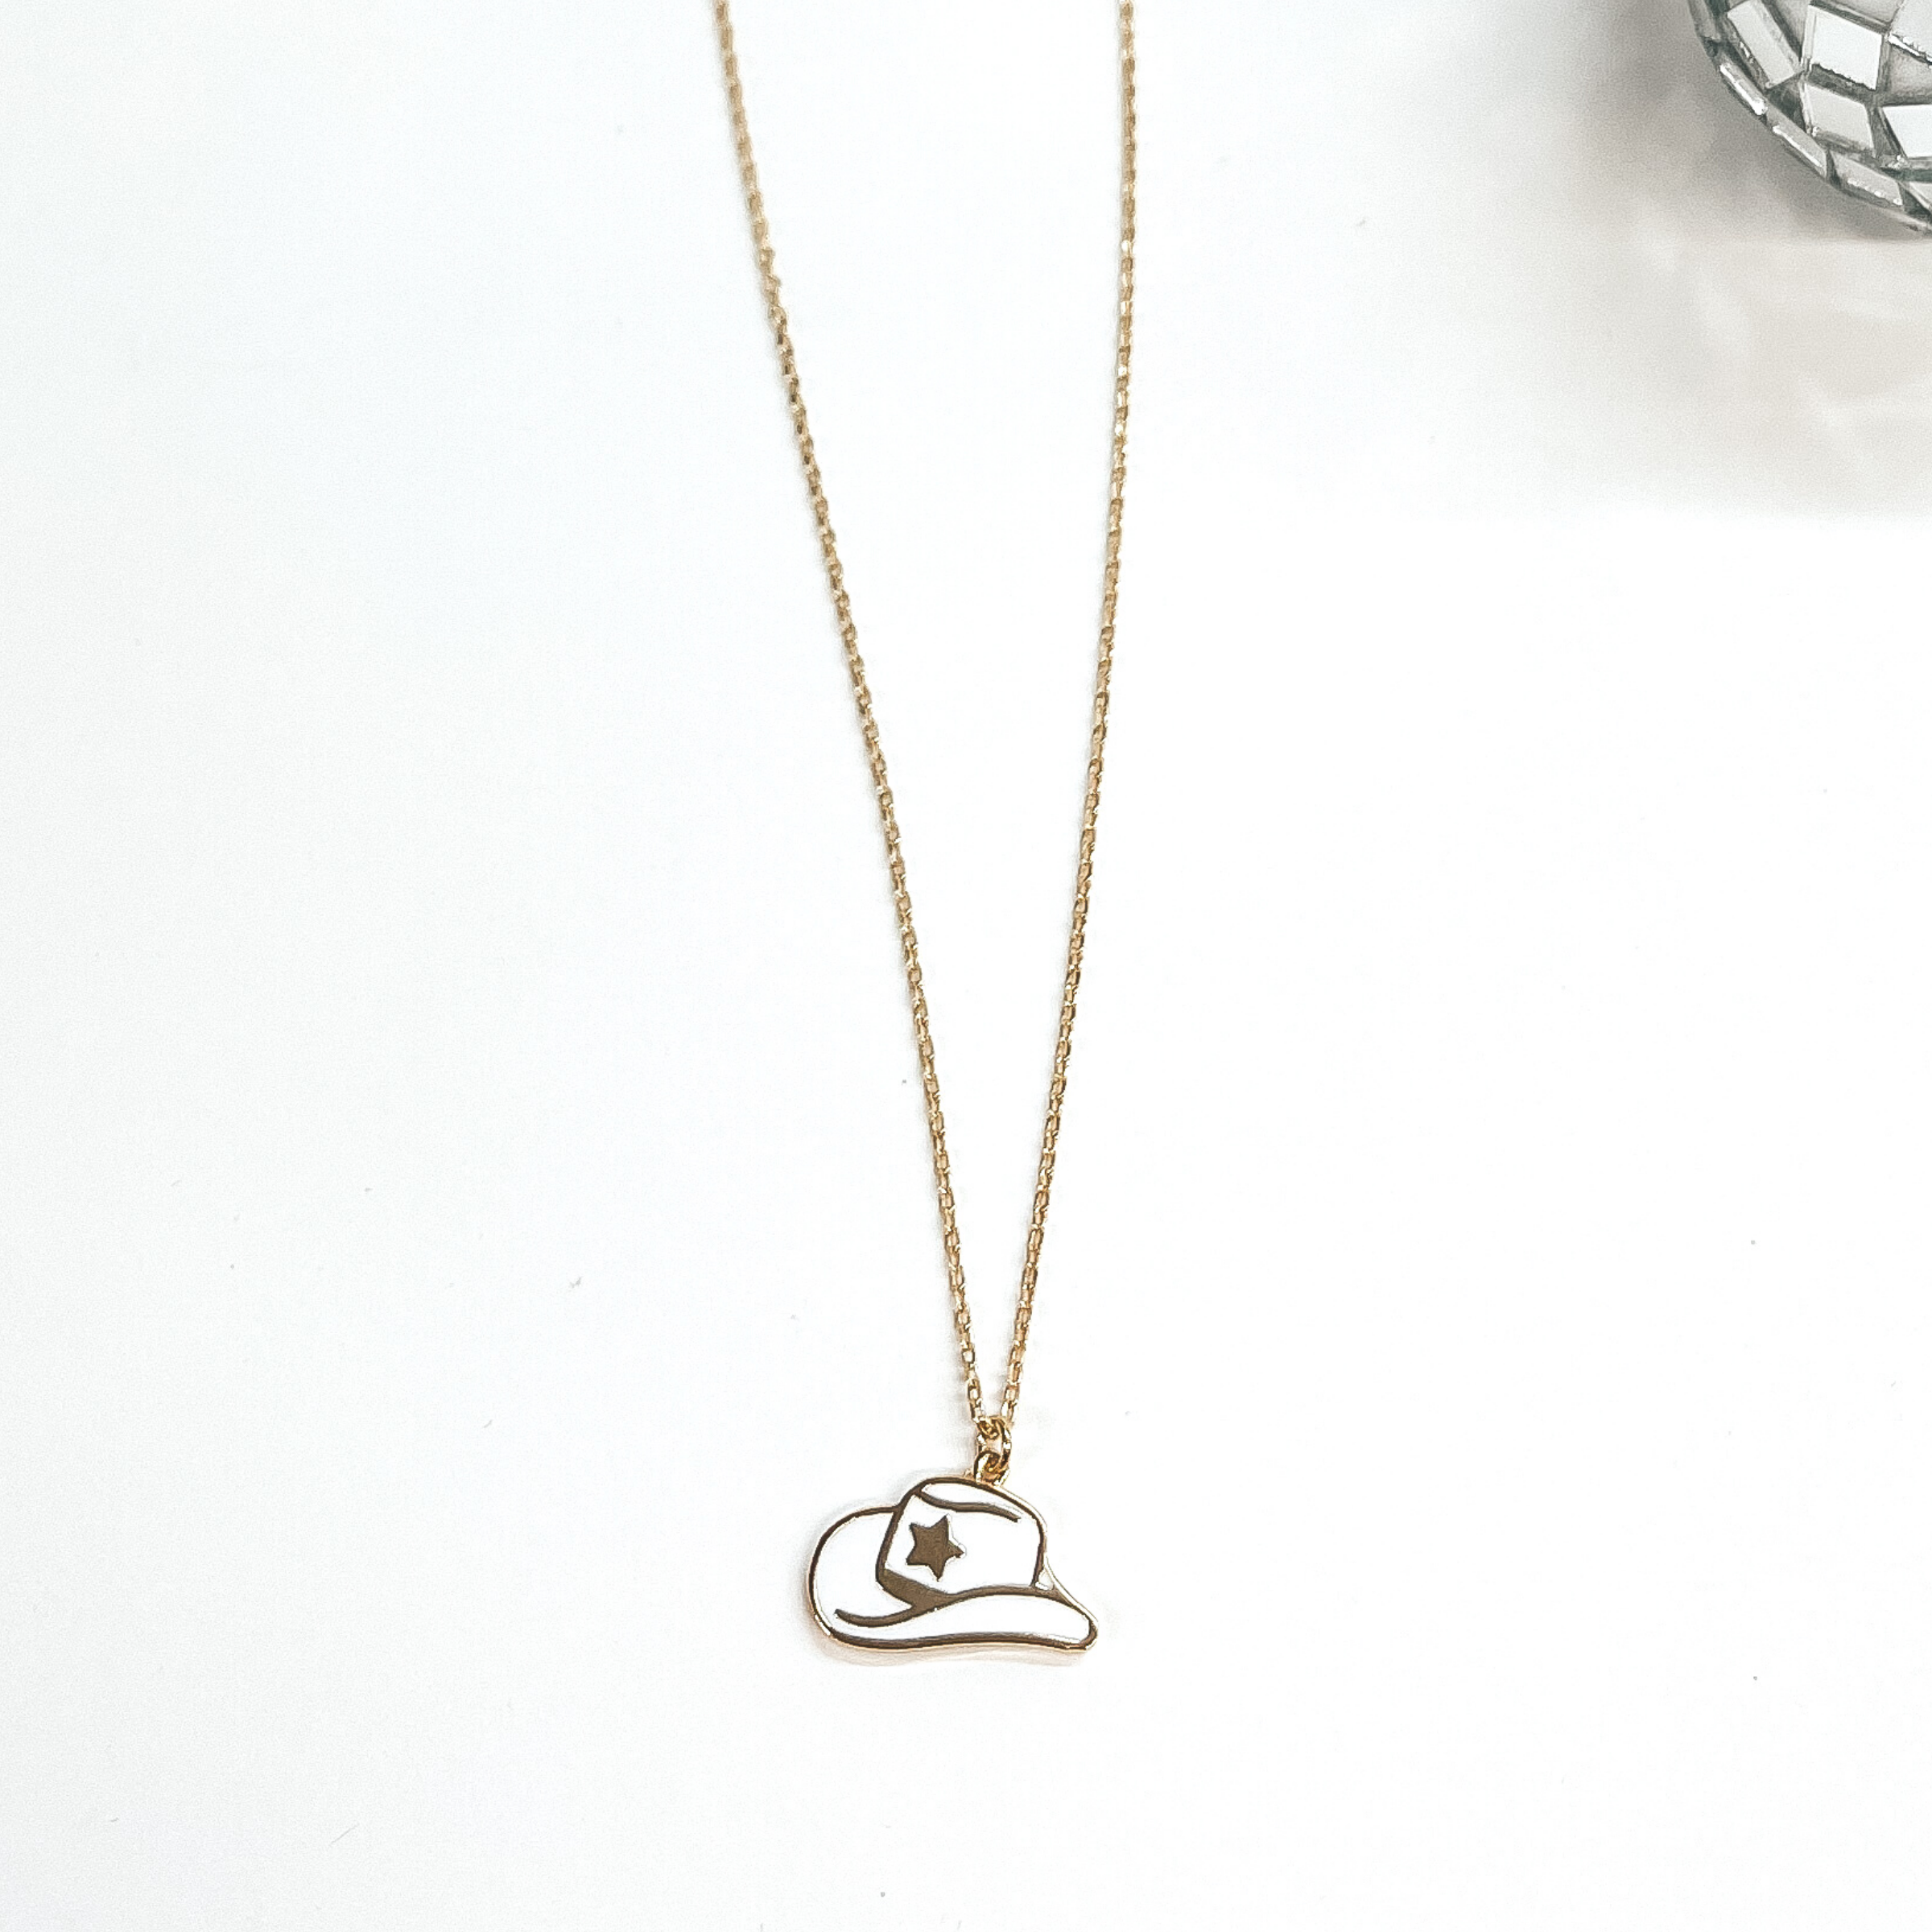 Take Me to Nashville Gold Necklace with Hat Pendant in White - Giddy Up Glamour Boutique